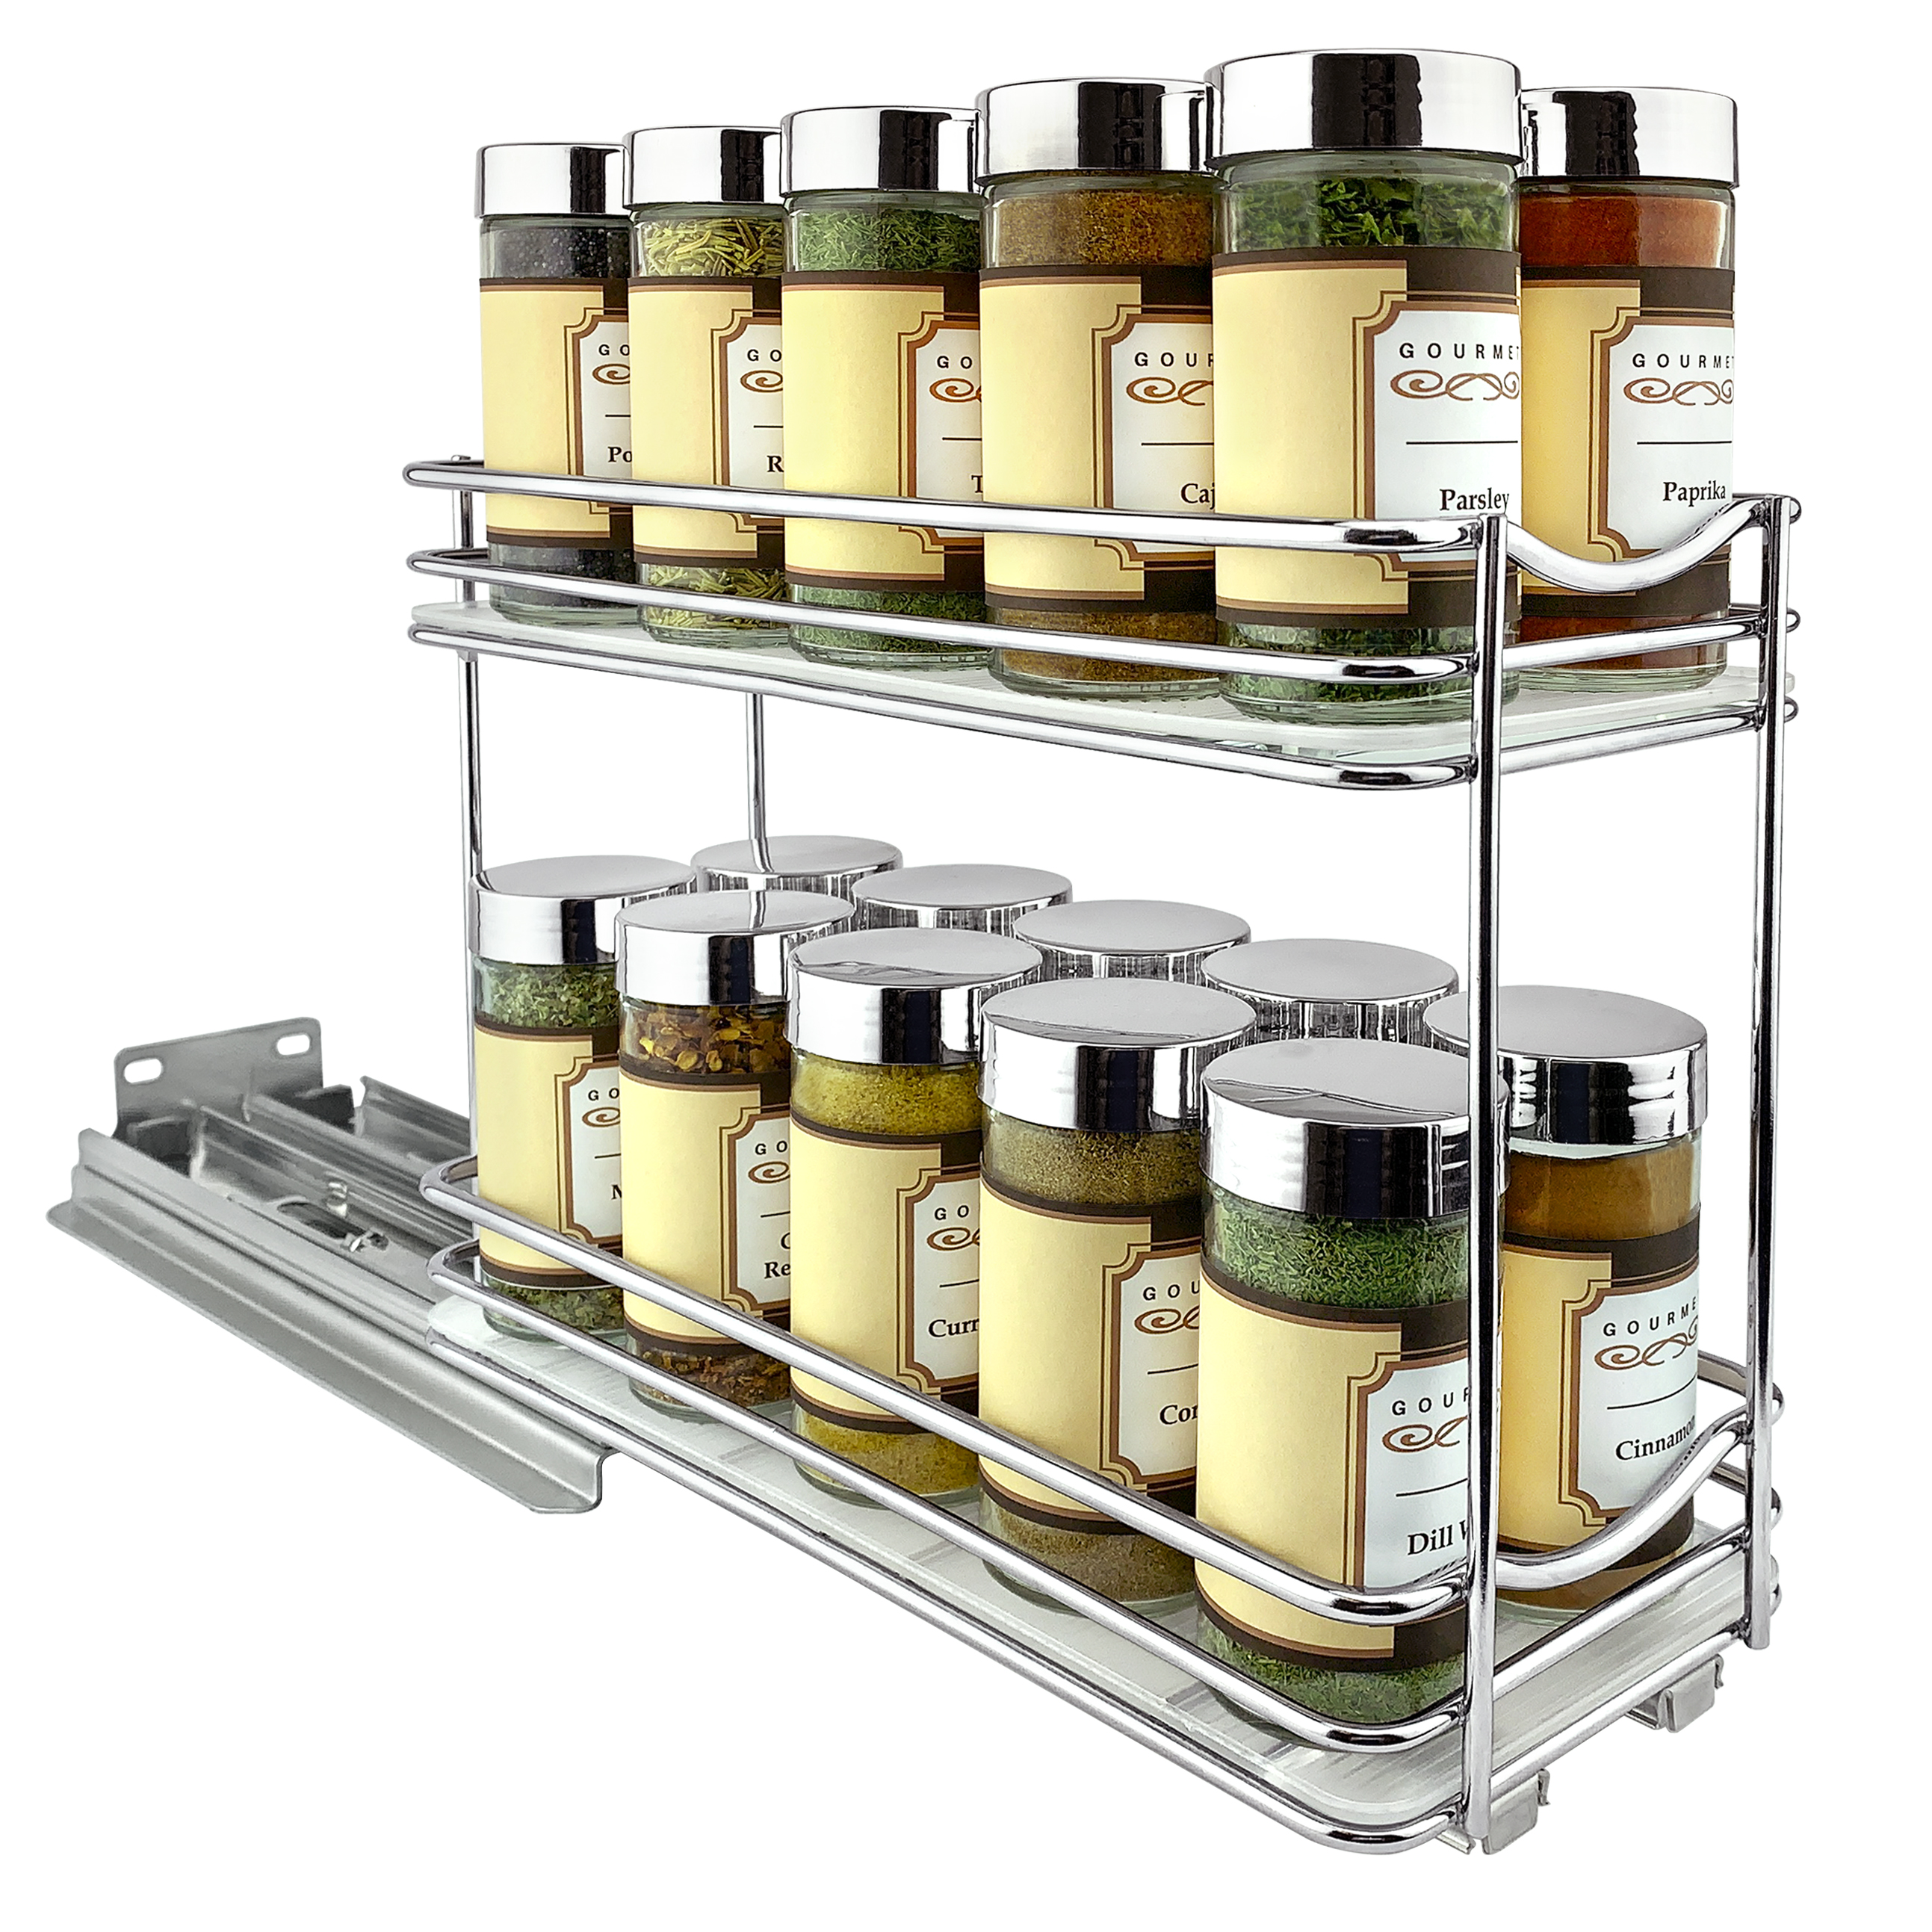 https://www.lynkinc.com/wp-content/uploads/2019/10/Lynk-430422DS_1-PROFESSIONAL-Roll-Out-Spice-Drawer-2-Tier.jpg